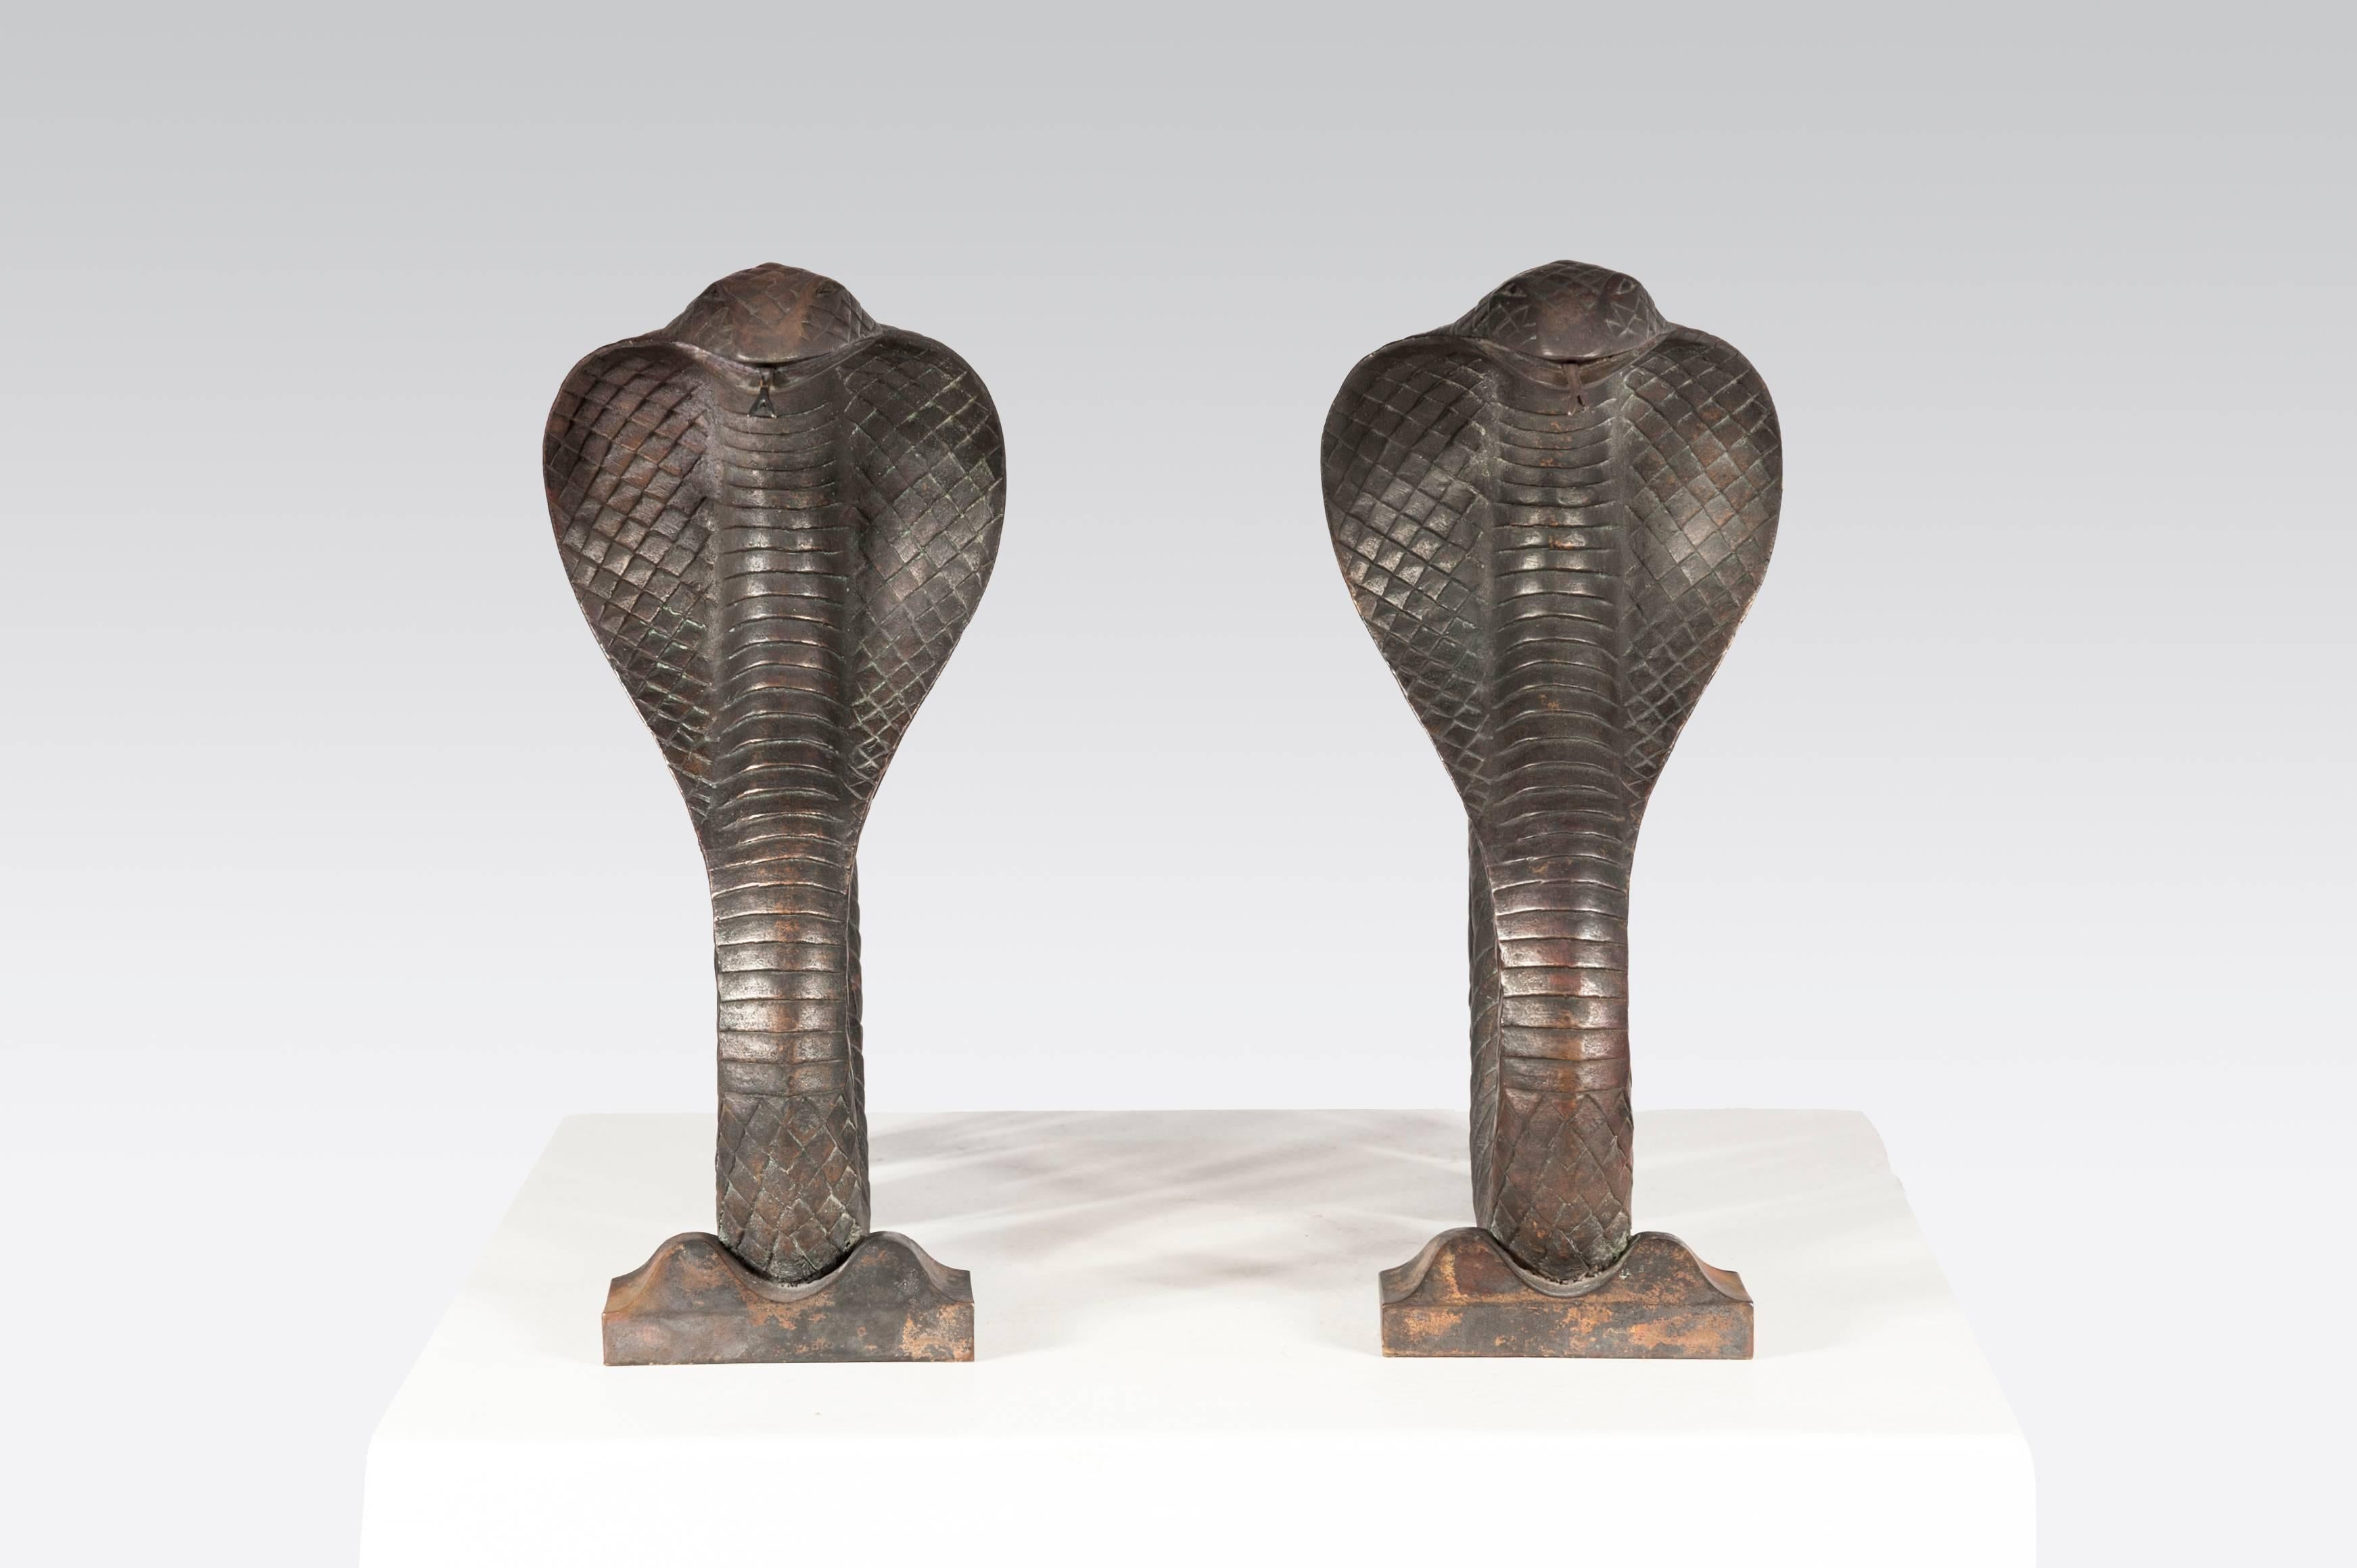 Pair of Cobra andirons in bronze By Edgar Brandt.
Stamped by the Artist.
As reference: a similar item was sold, in 2008, by Sotheby’s in London.